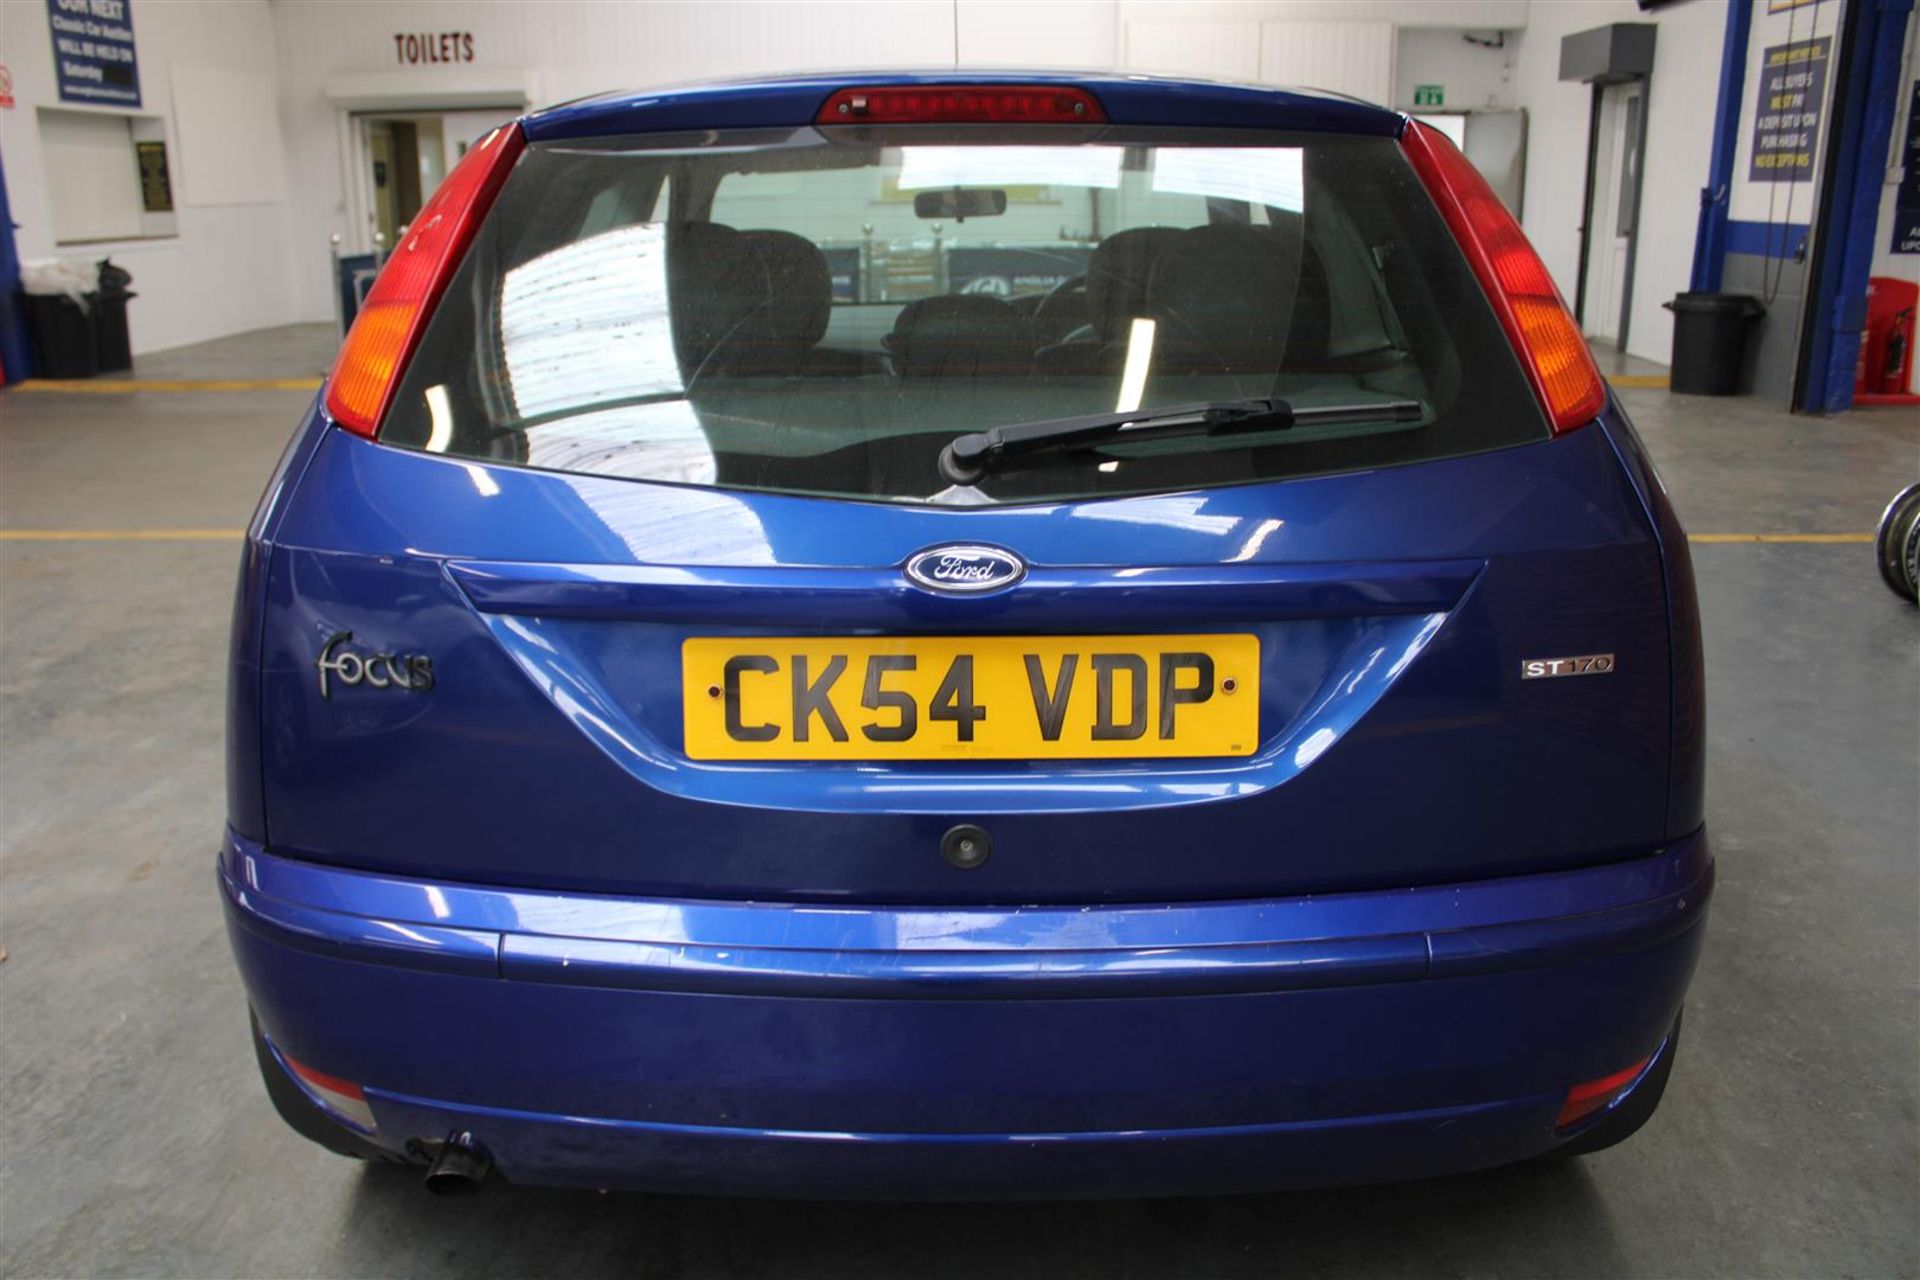 54 04 Ford Focus ST170 - Image 30 of 33